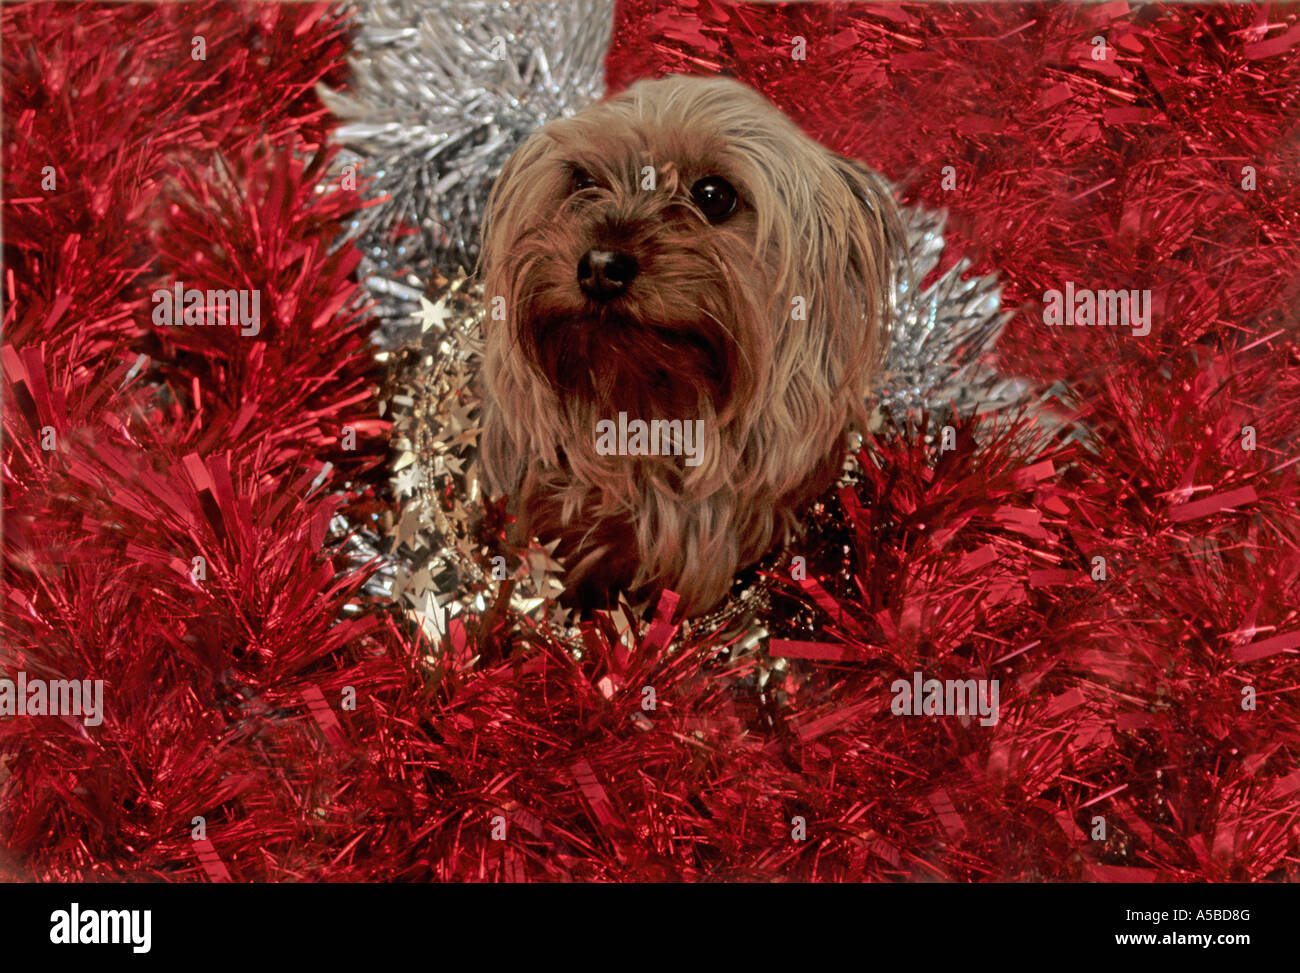 Yorkshire terrier dog at Christmas surrounded in tinsel looking very cute Stock Photo